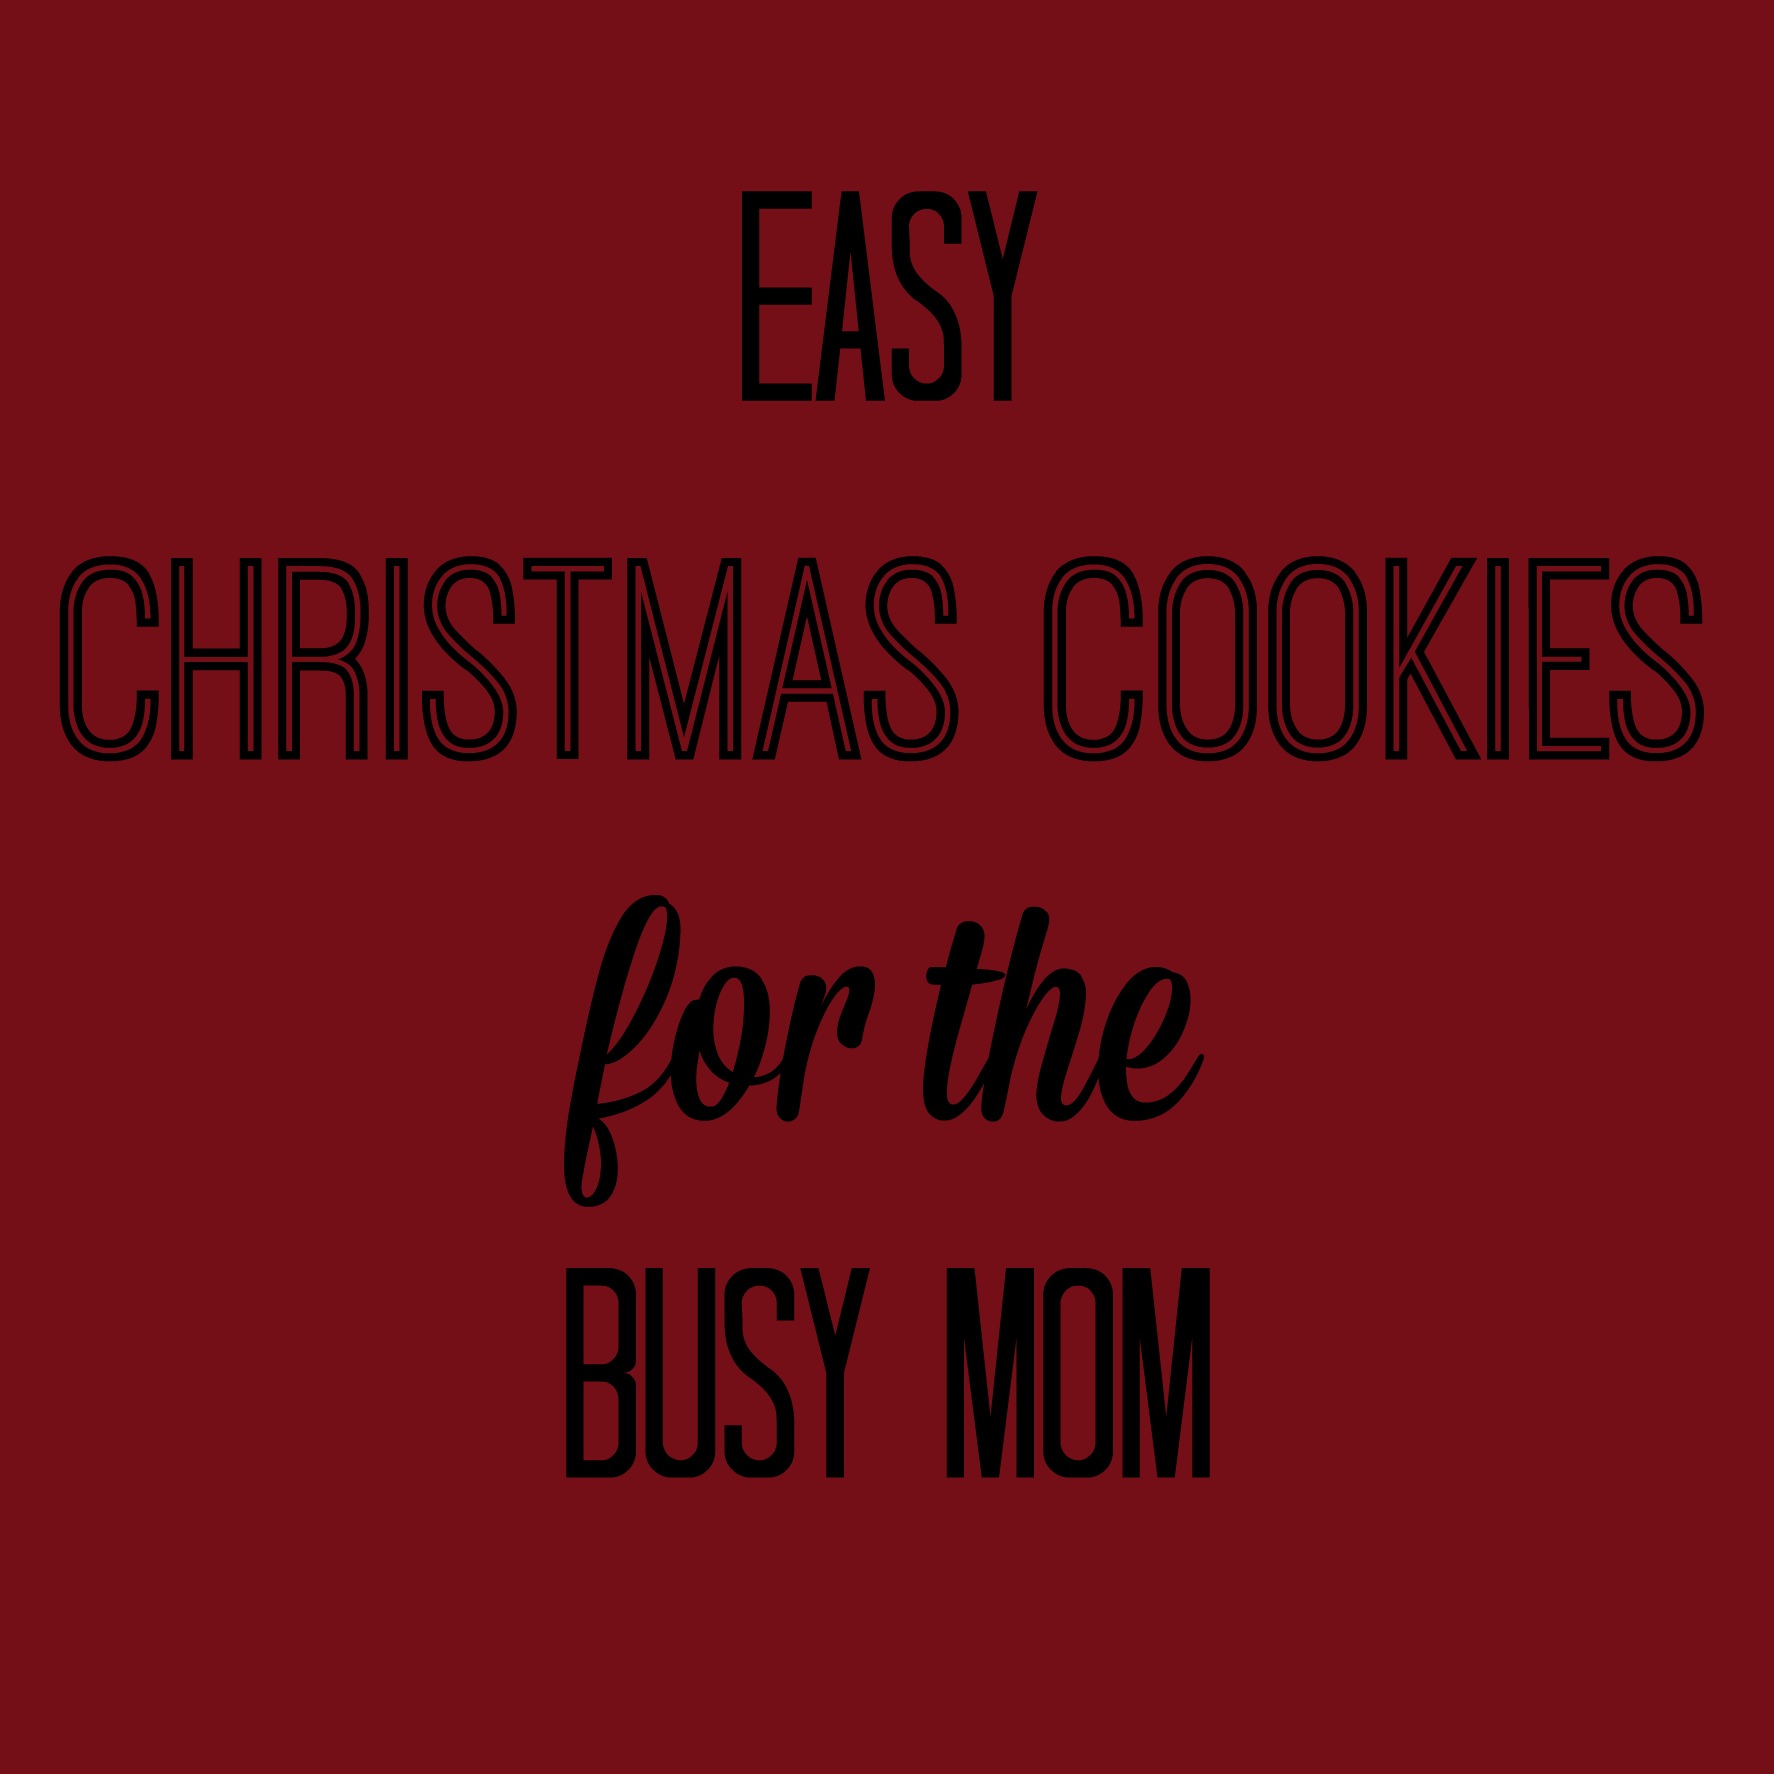 Easy Christmas Cookies for the Busy Mom